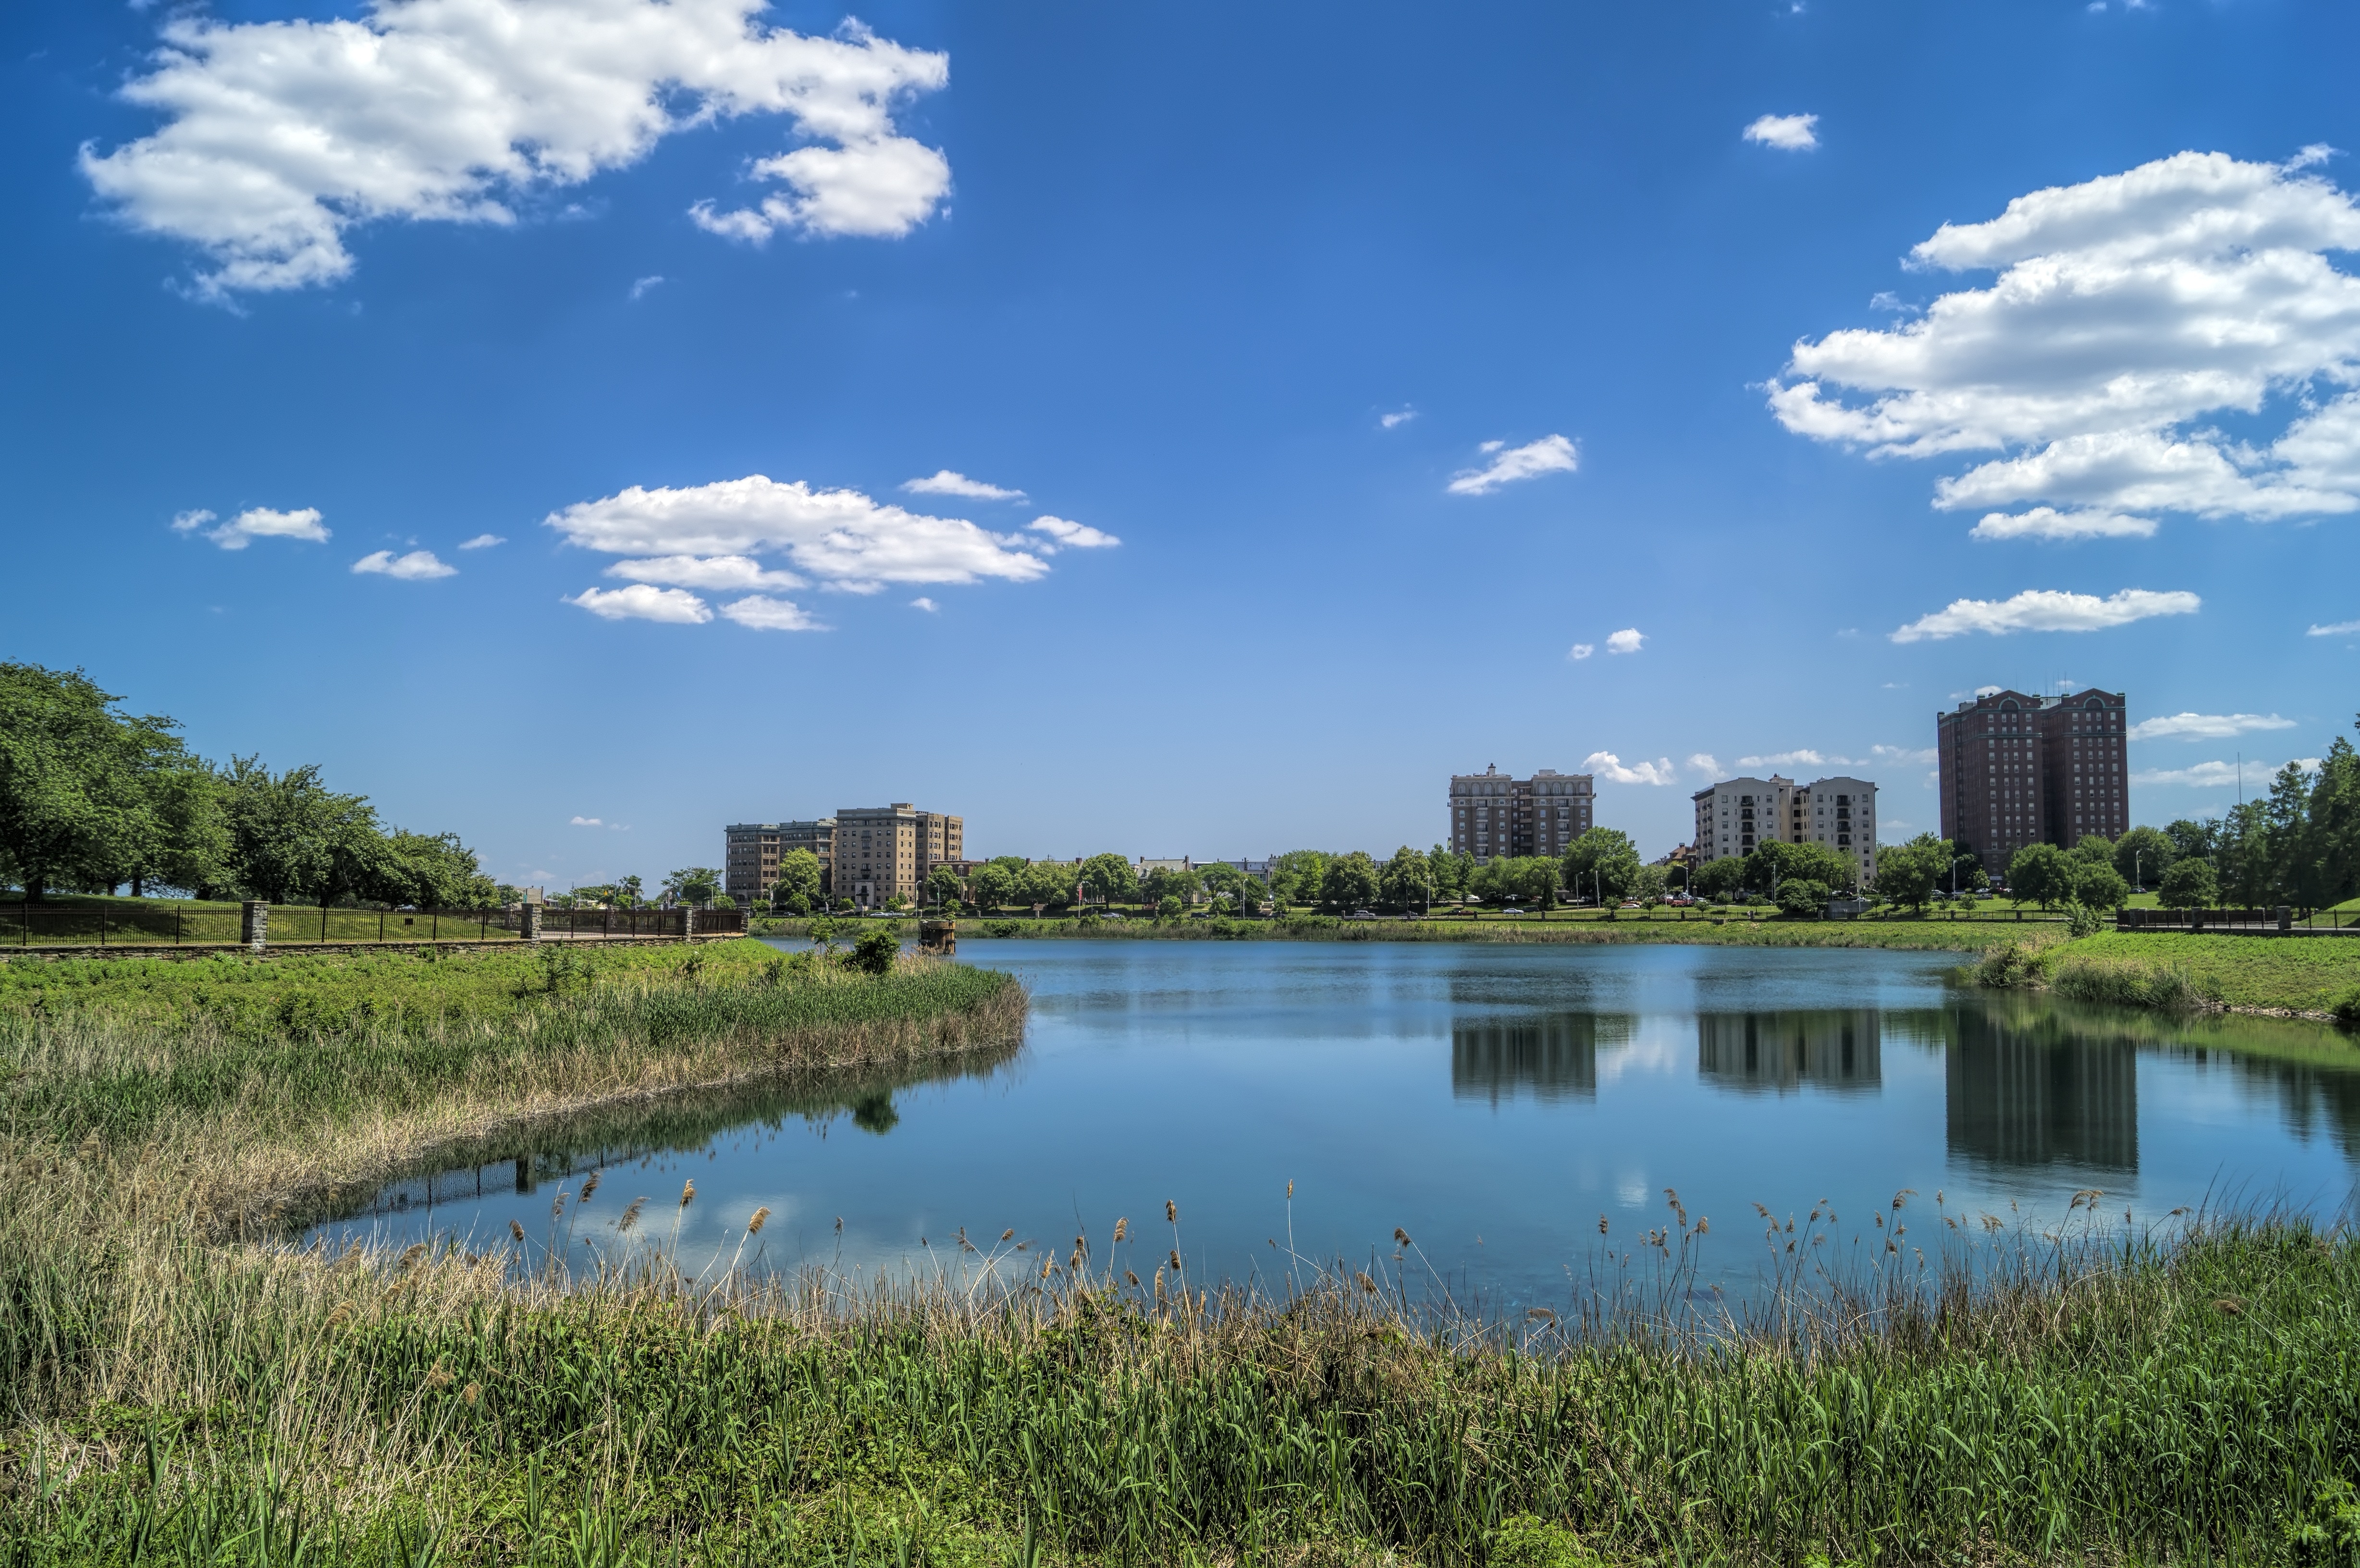 city buildings near body of water surrounded by green grass and green leaved trees under blue and white cloudy sky during daytime